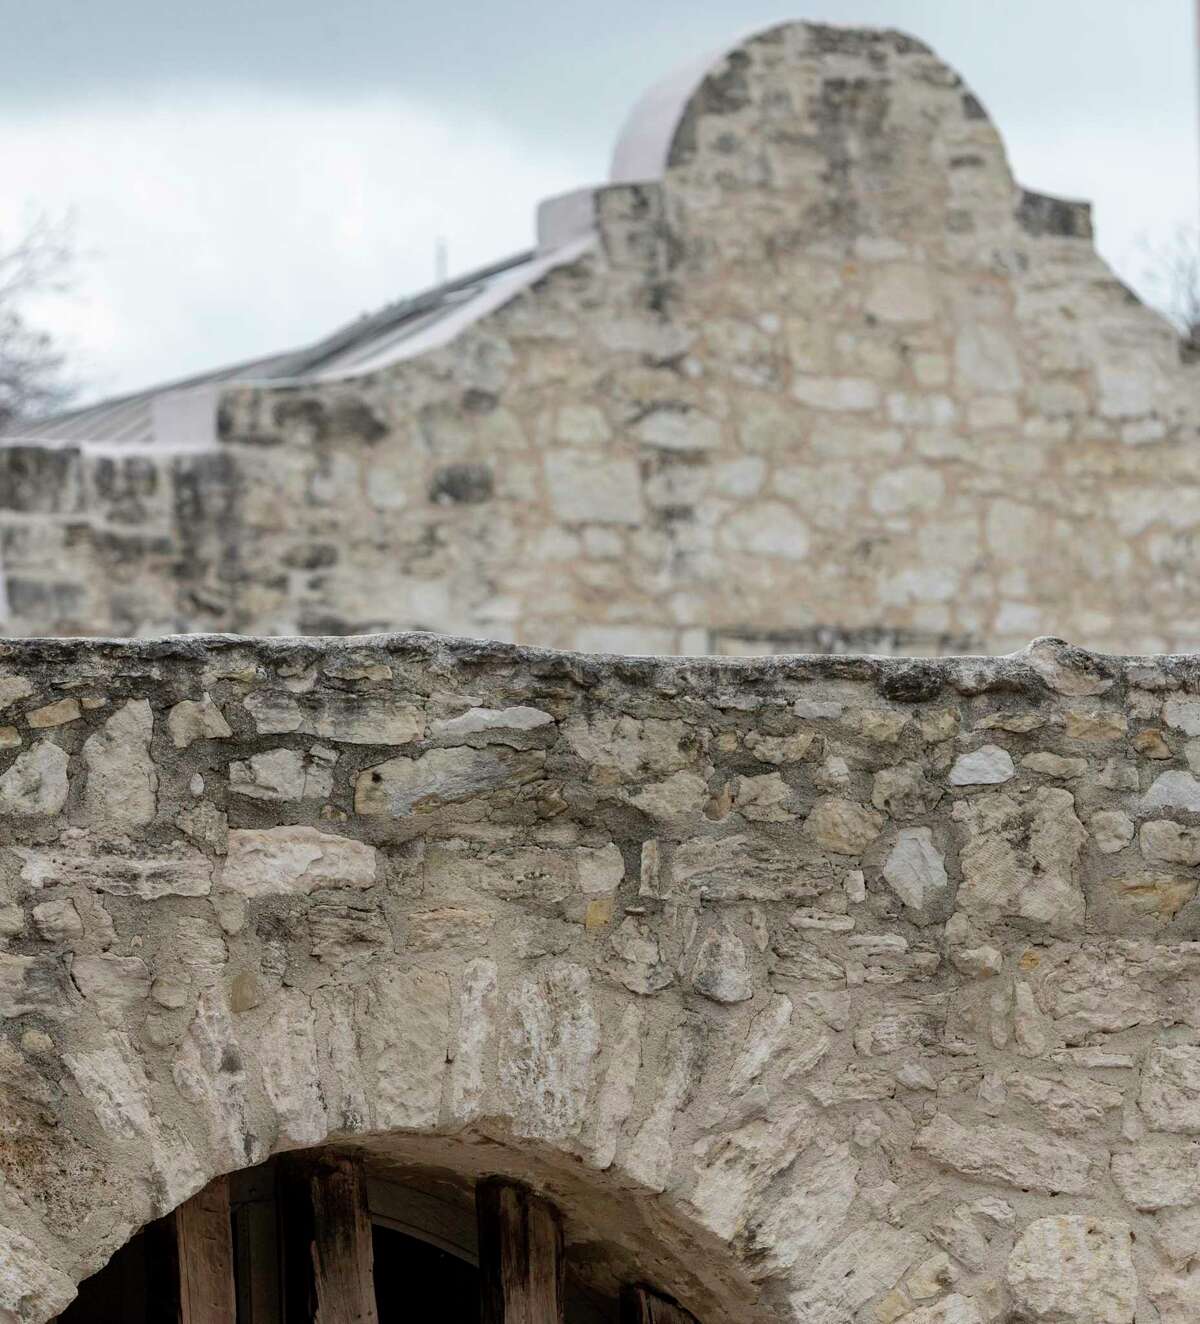 Restoration of the church and Long Barrack is the top priority for Kate Rogers, the newly named Alamo executive director, according to reporting by Scott Huddleston of the Express-News. Leaders also plan to build a new museum and visitor center on the plaza grounds.